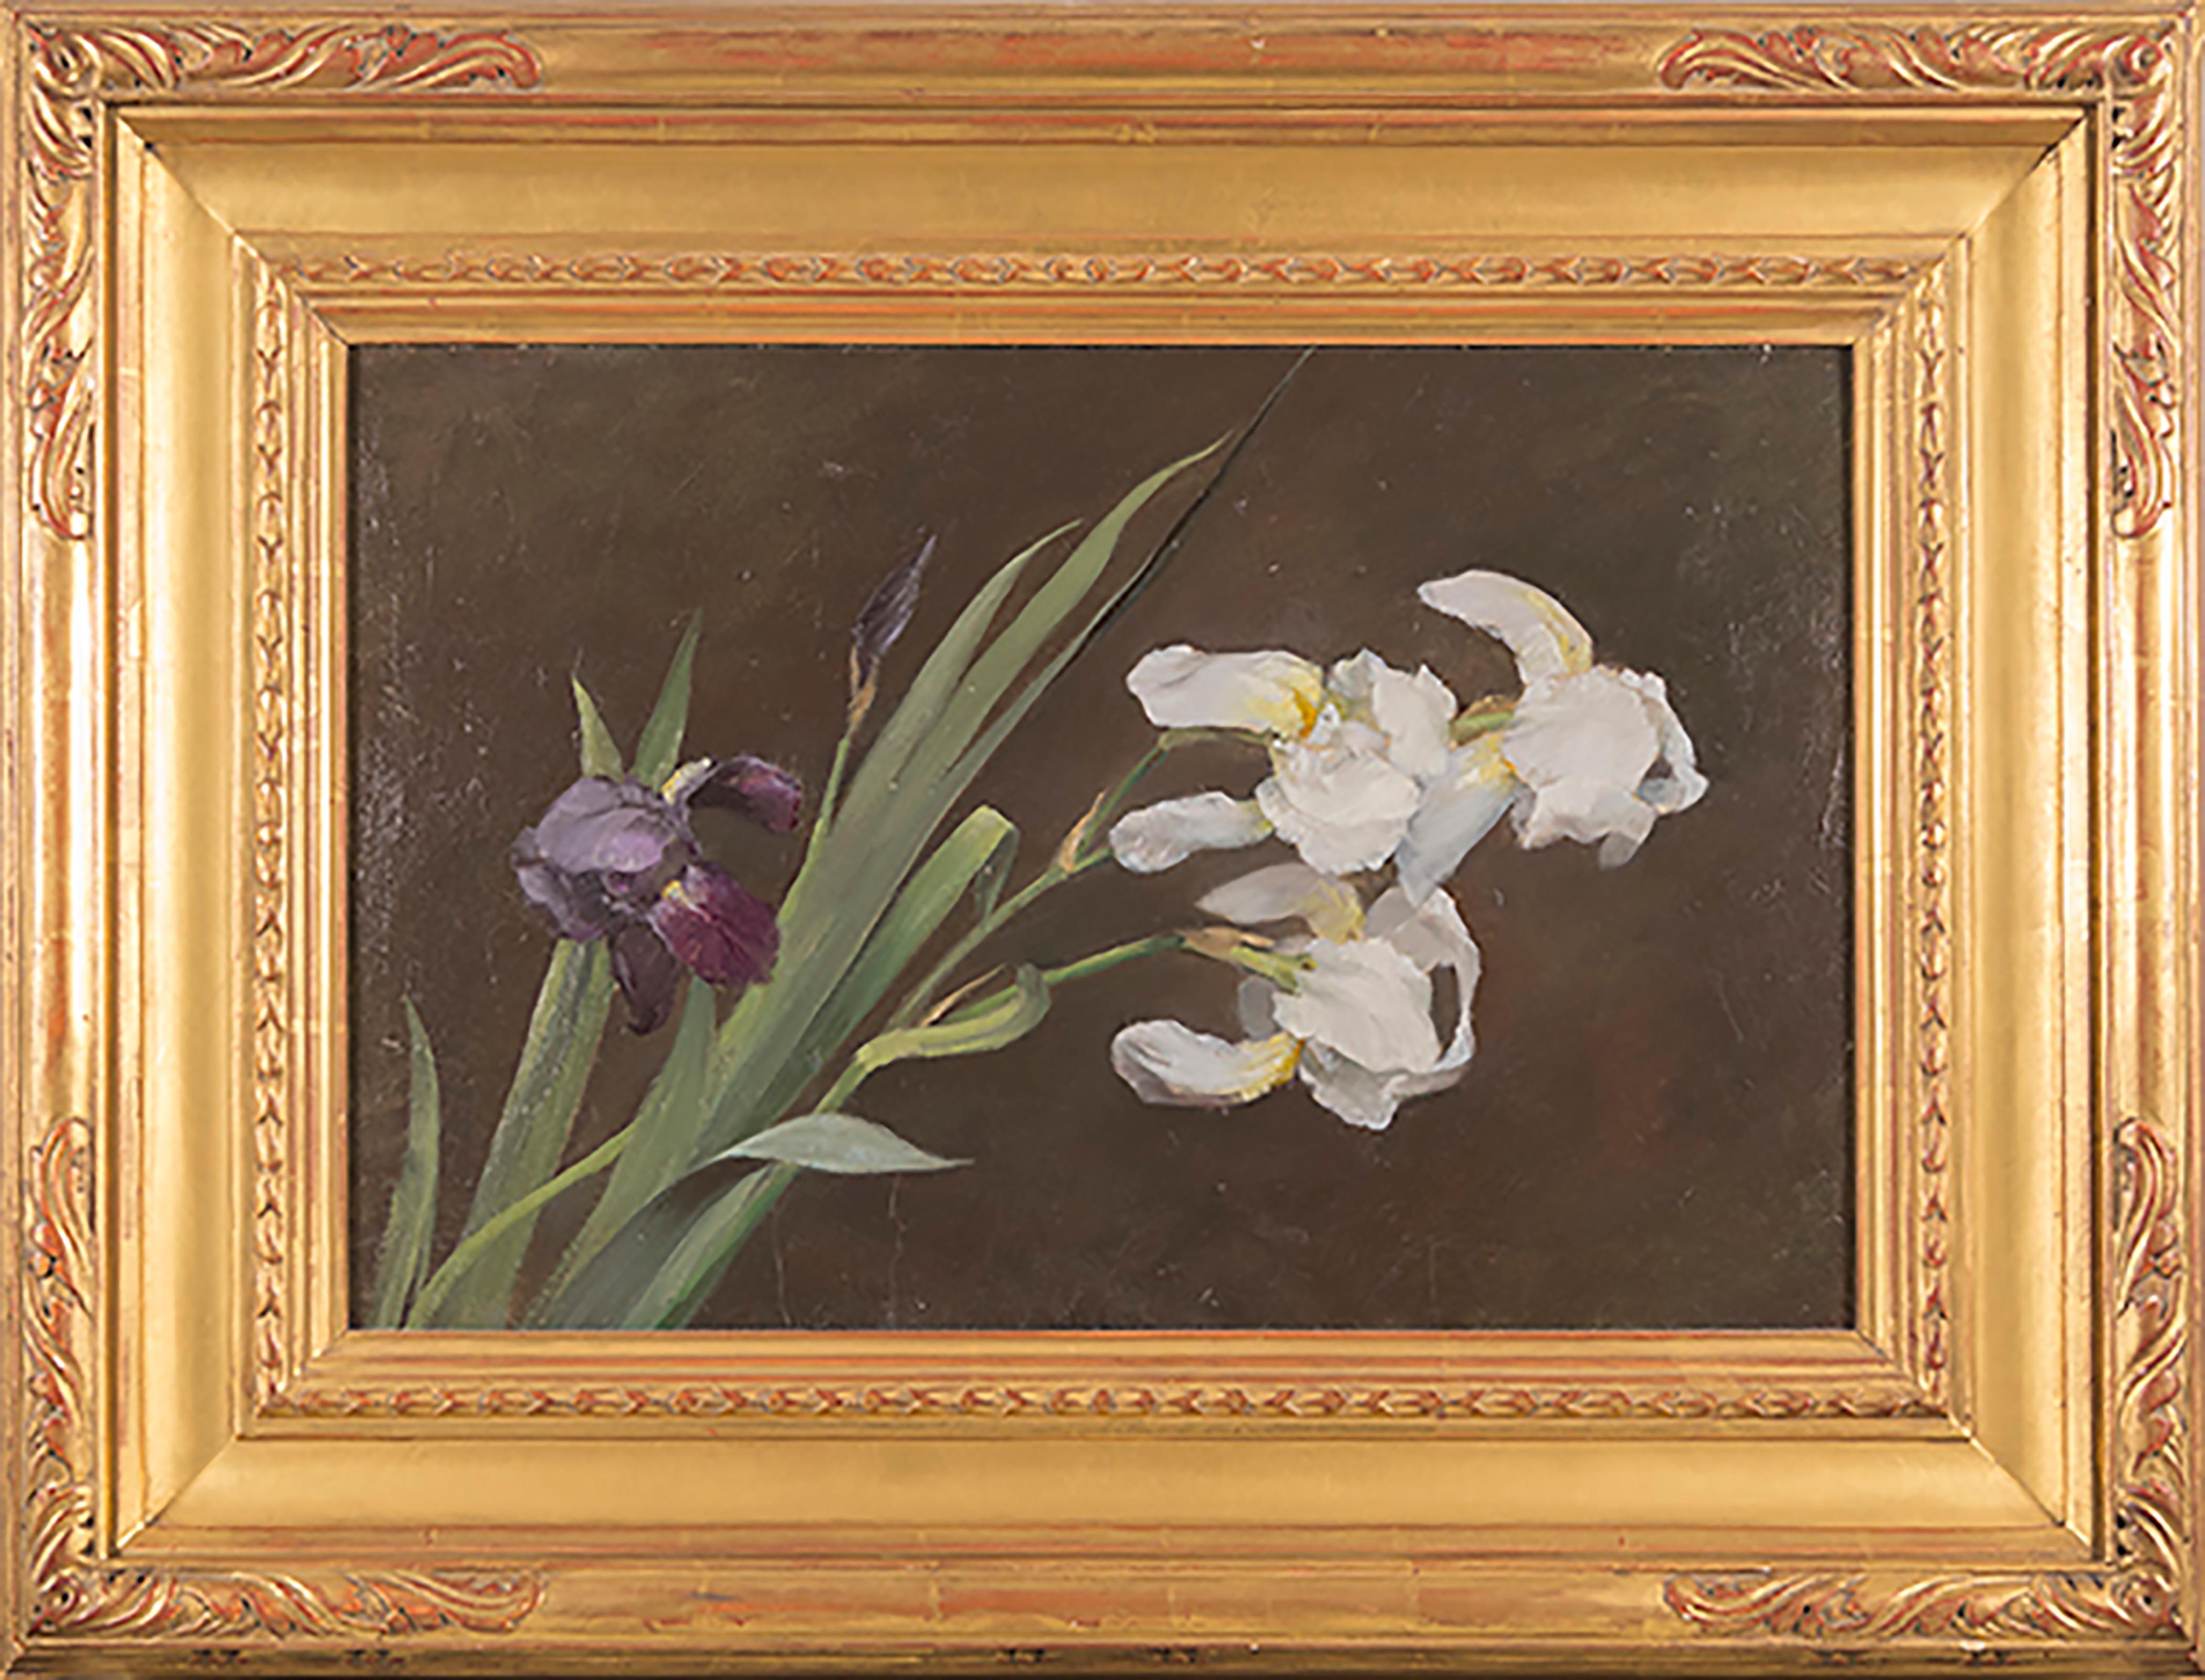 Purple and White Iris - Naturalistic Painting by Fannie C. Burr